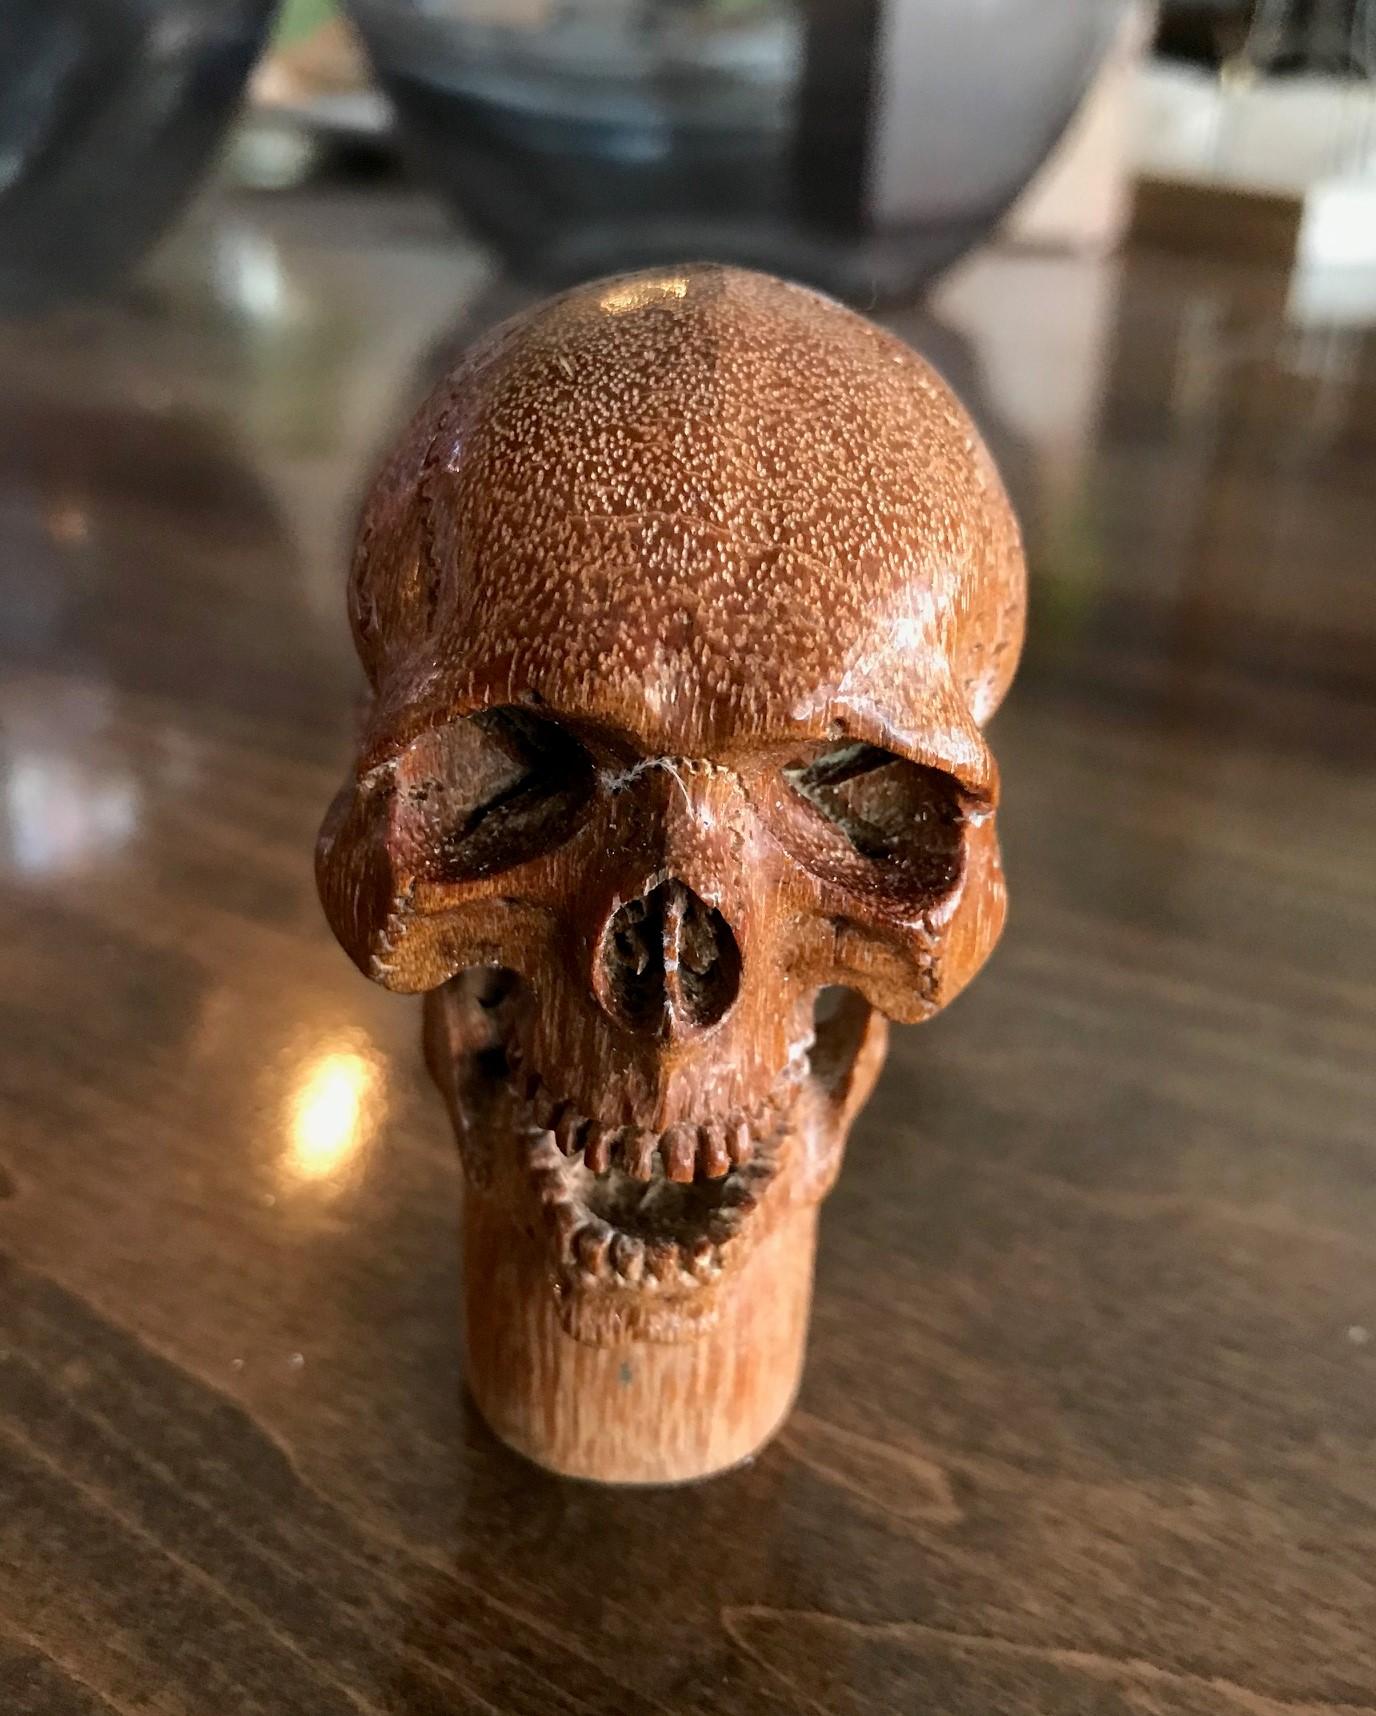 A fantastic and wonderfully hand carved piece. This smiling, mischievous skull is carved in very fine detail. Would be the crown jewel of any walking stick collection once attached to the cane. Truly a unique and one of a kind work.

Dimensions: